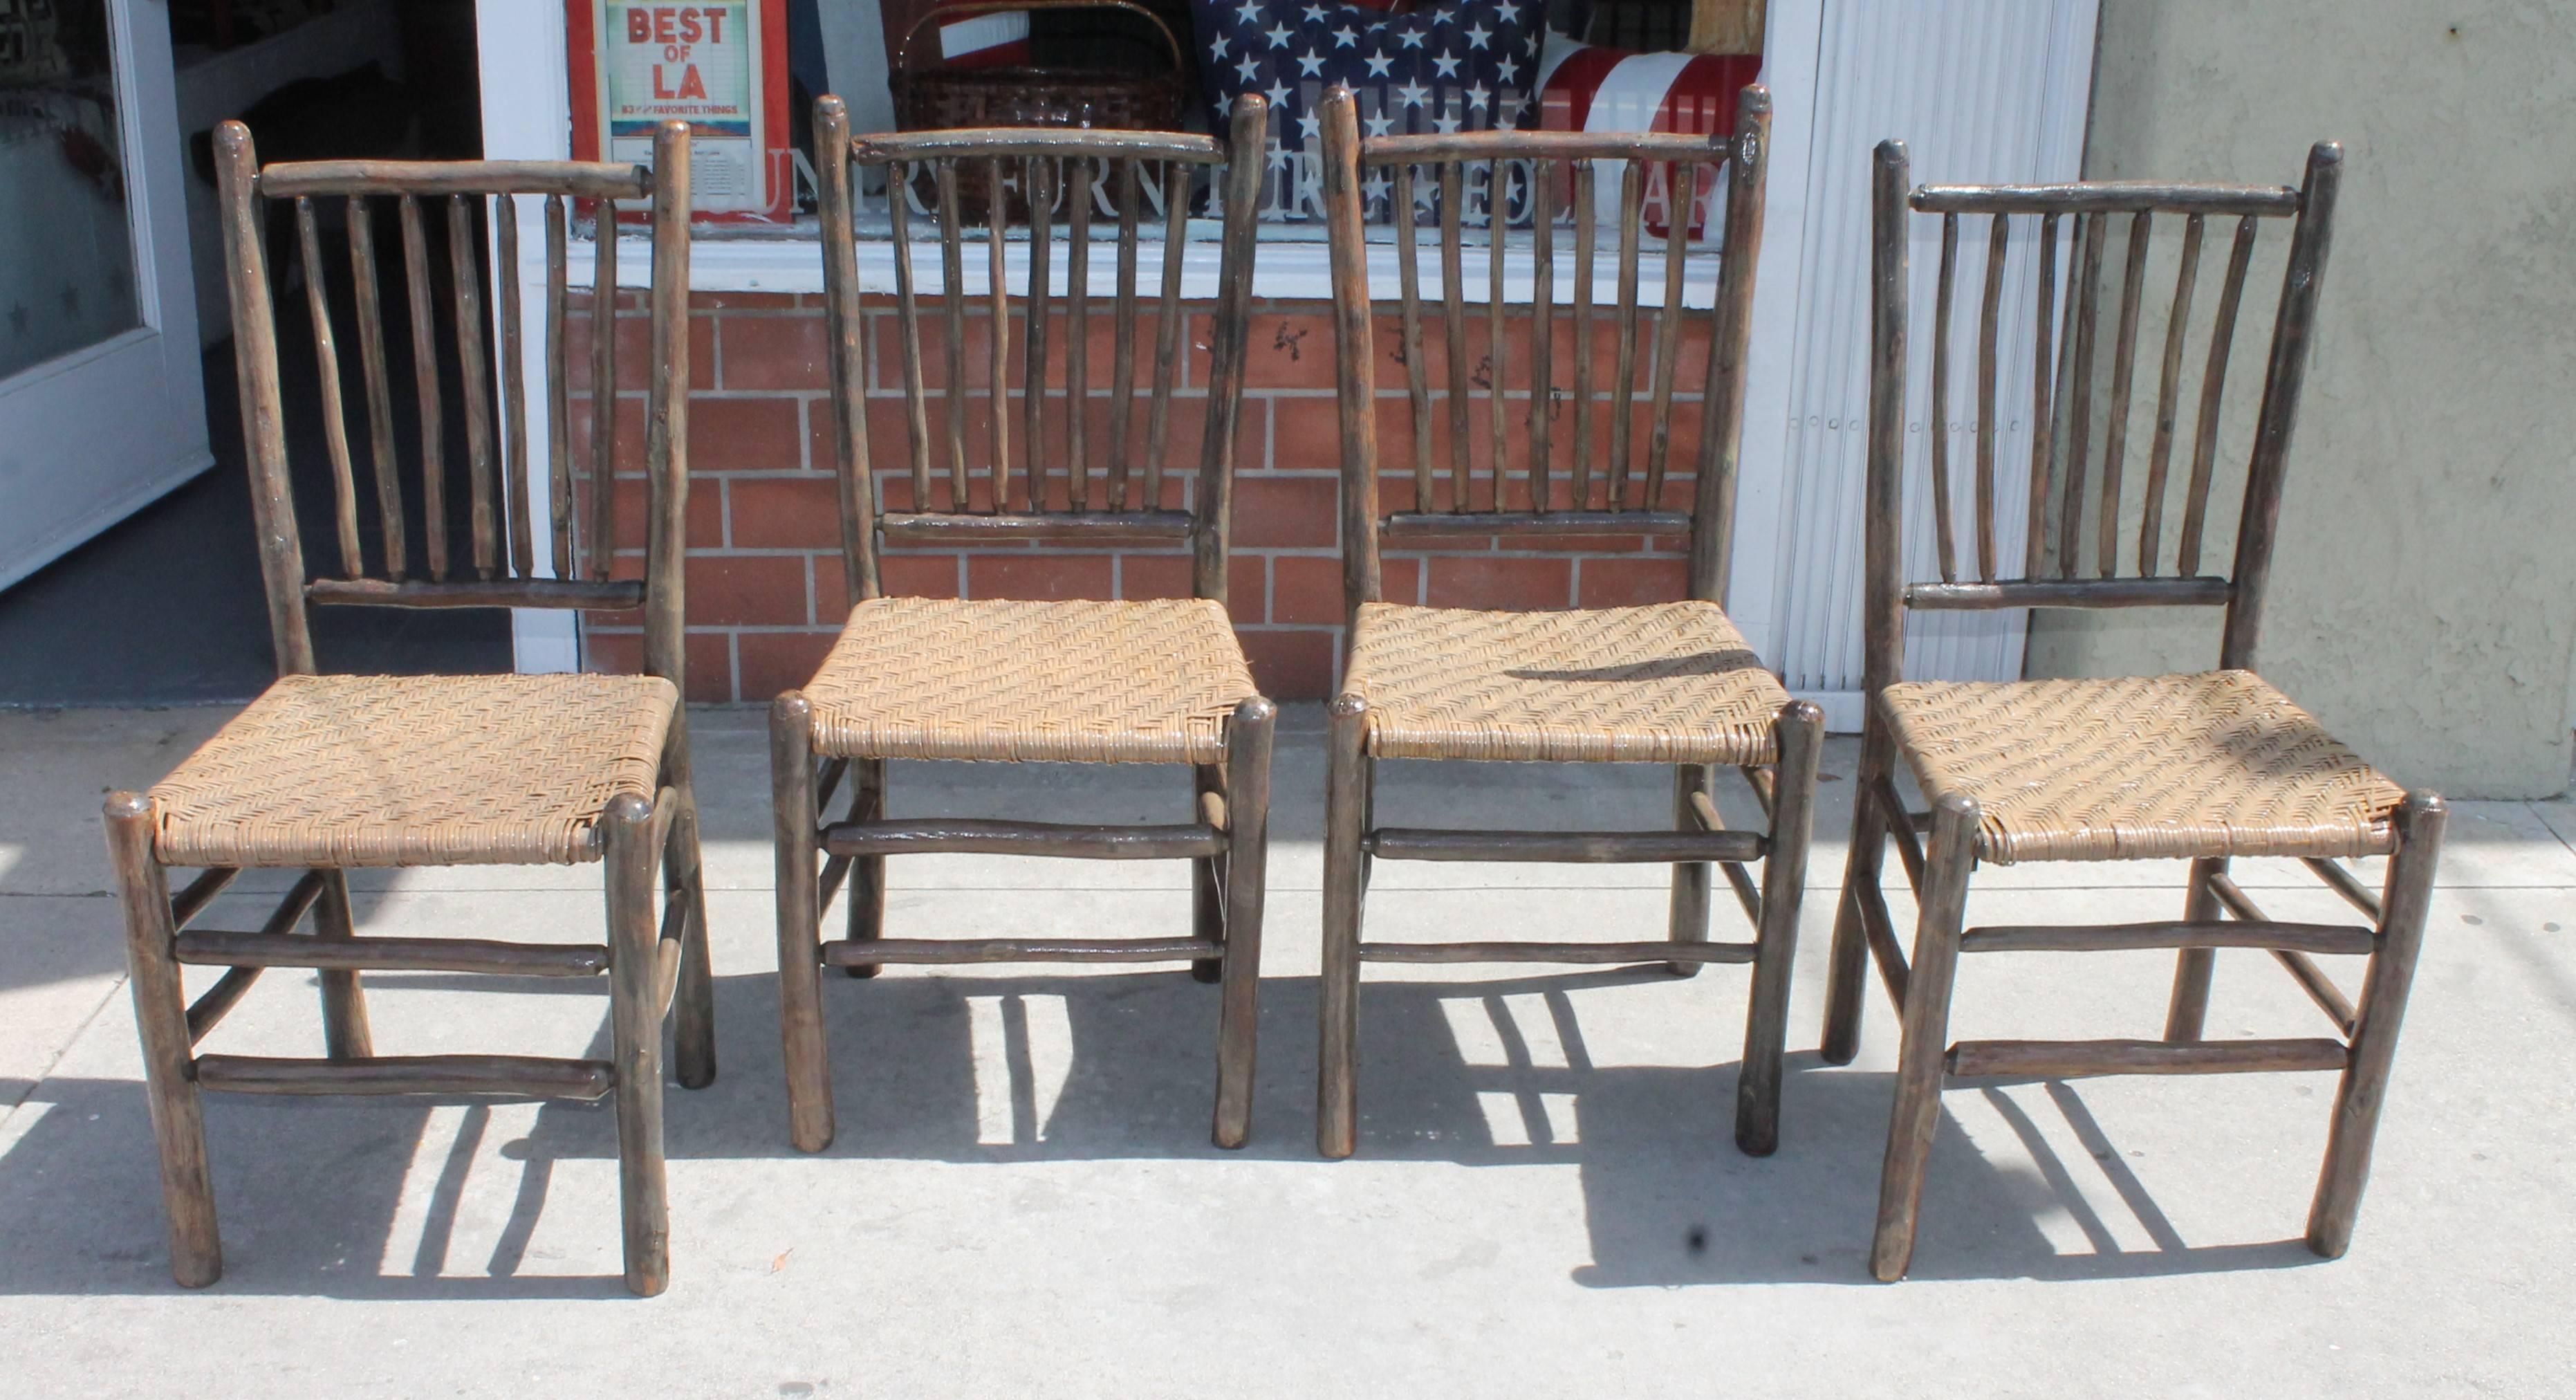 Amazing set of four matching original grey painted rustic hickory dining chairs .The seats are the original woven seats and the chairs are signed on the reverse Old Hickory Furniture Company, Martinsville ,Indiana stamped on the lower back legs. The